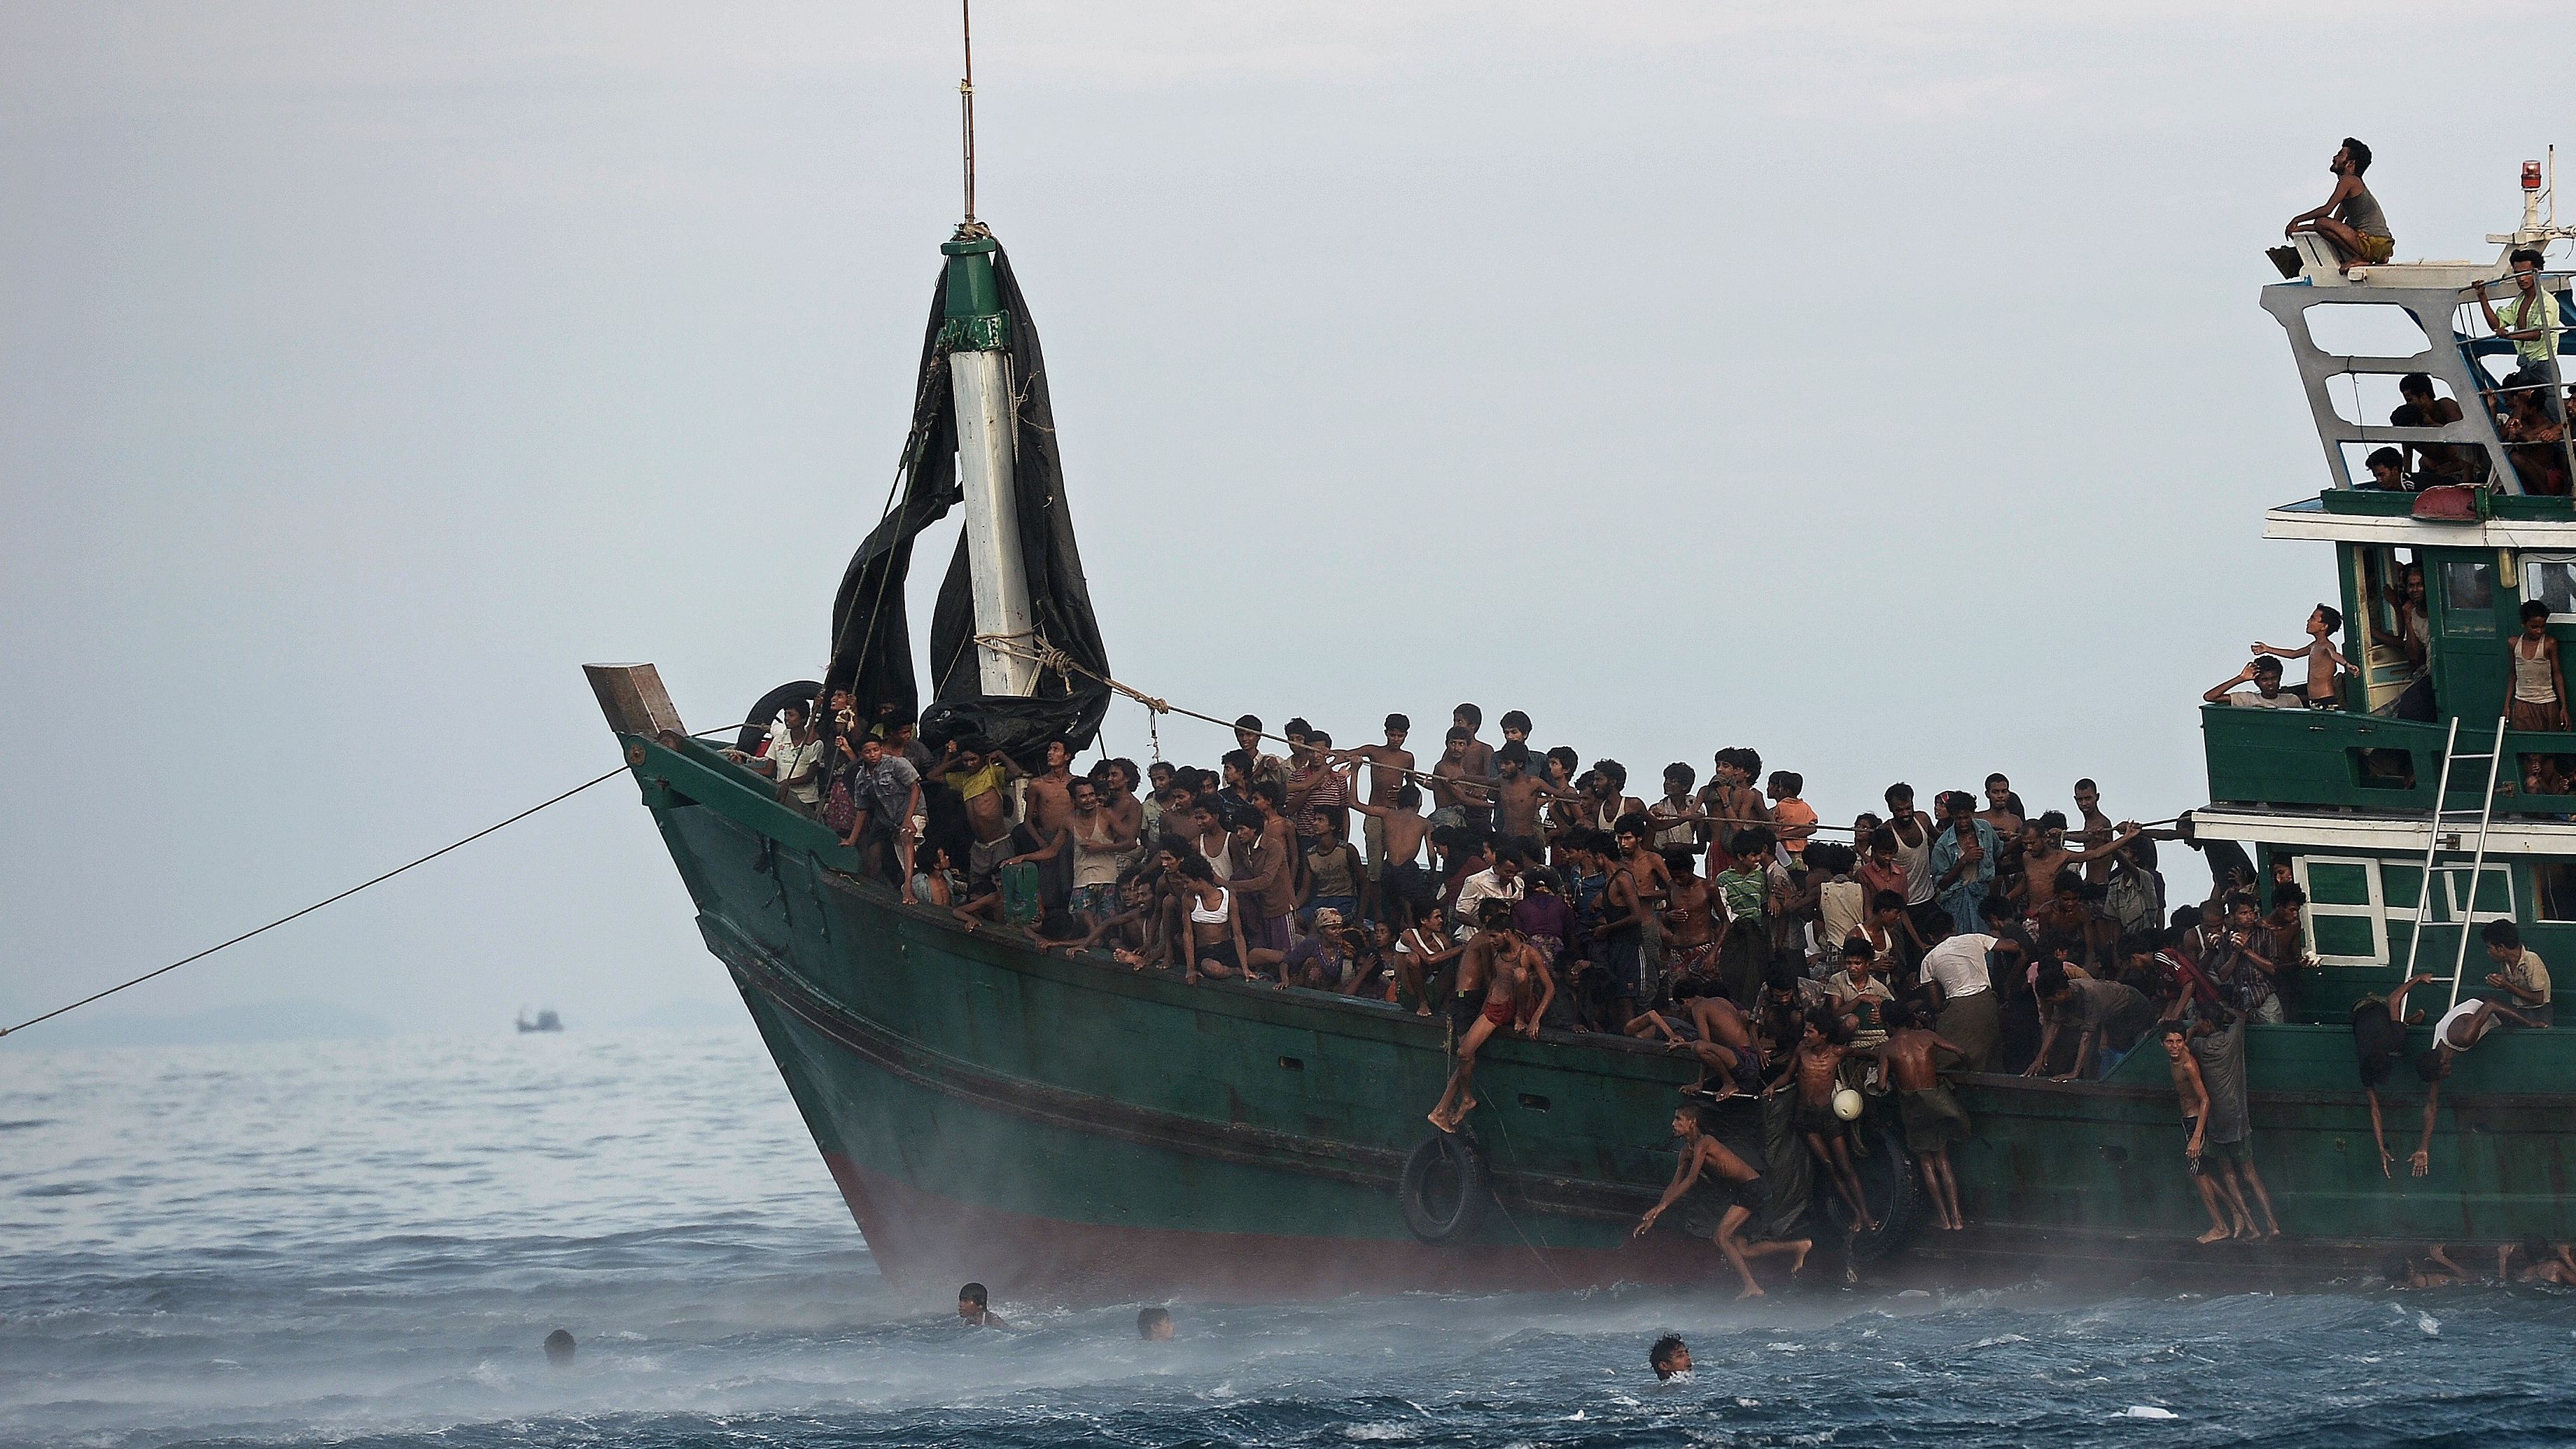 Rohingya migrants jump off a boat to collect food supplies dropped by a Thai army helicopter in May 2015. The boat, drifting in Thai waters, was crammed with scores of migrants. <a href="https://www.cnn.com/2019/11/20/asia/aung-san-suu-kyi-rohingya-icj-intl/index.html" target="_blank">More than 740,000 Rohingya have fled into neighboring Bangladesh</a> after Myanmar's military launched a campaign of violence against the ethnic Muslim minority. Myanmar has defended its actions, saying it was targeting terrorists.